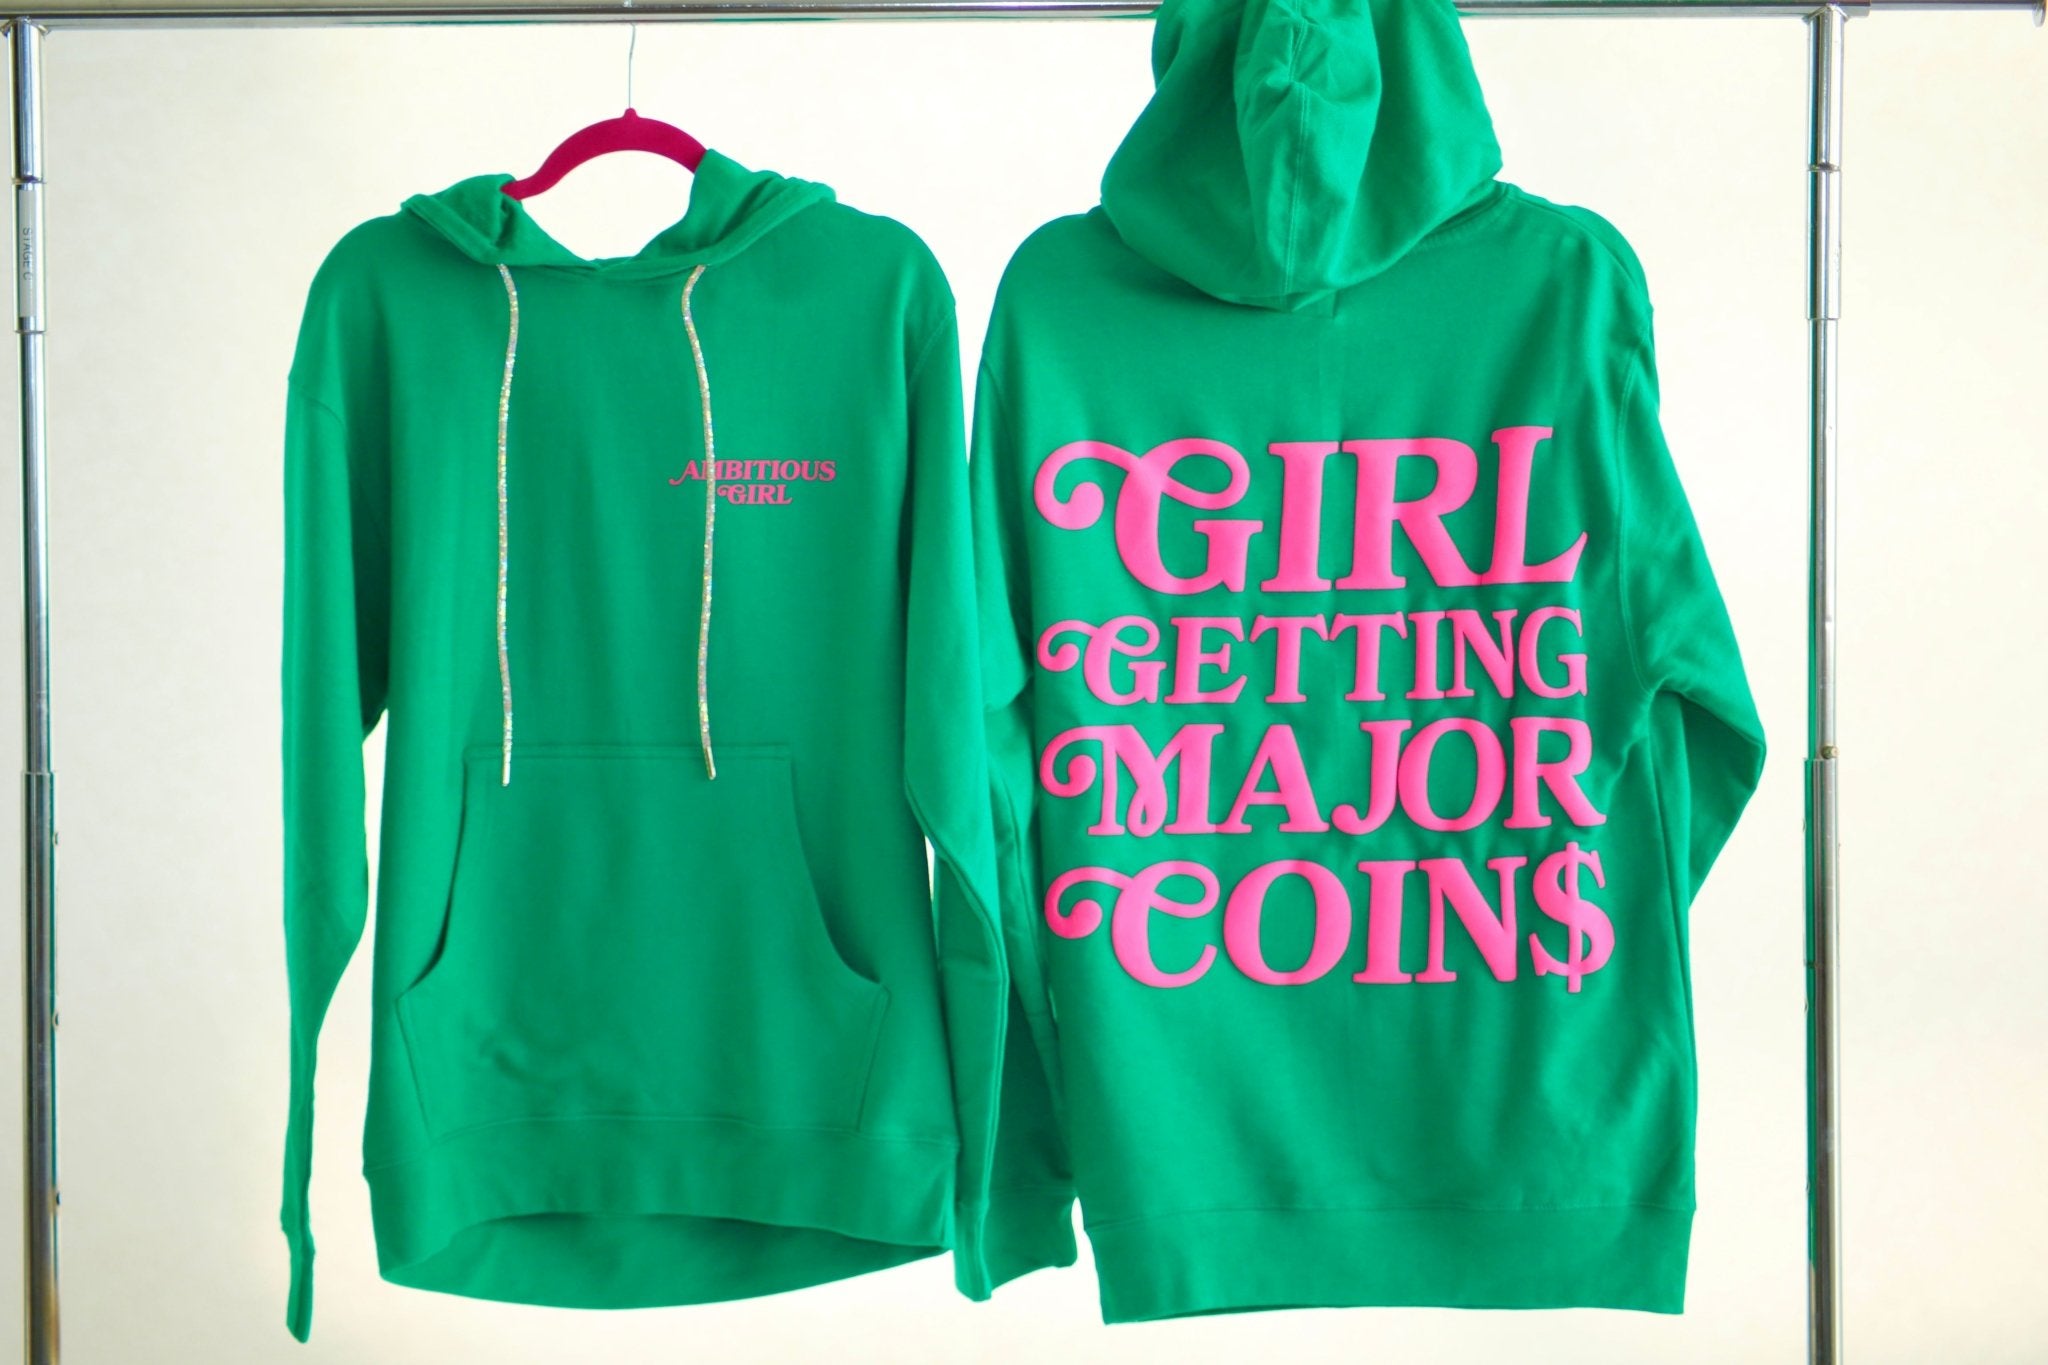 Girls Getting Major Coin$: Hoodie - Ambition Is The New Pink